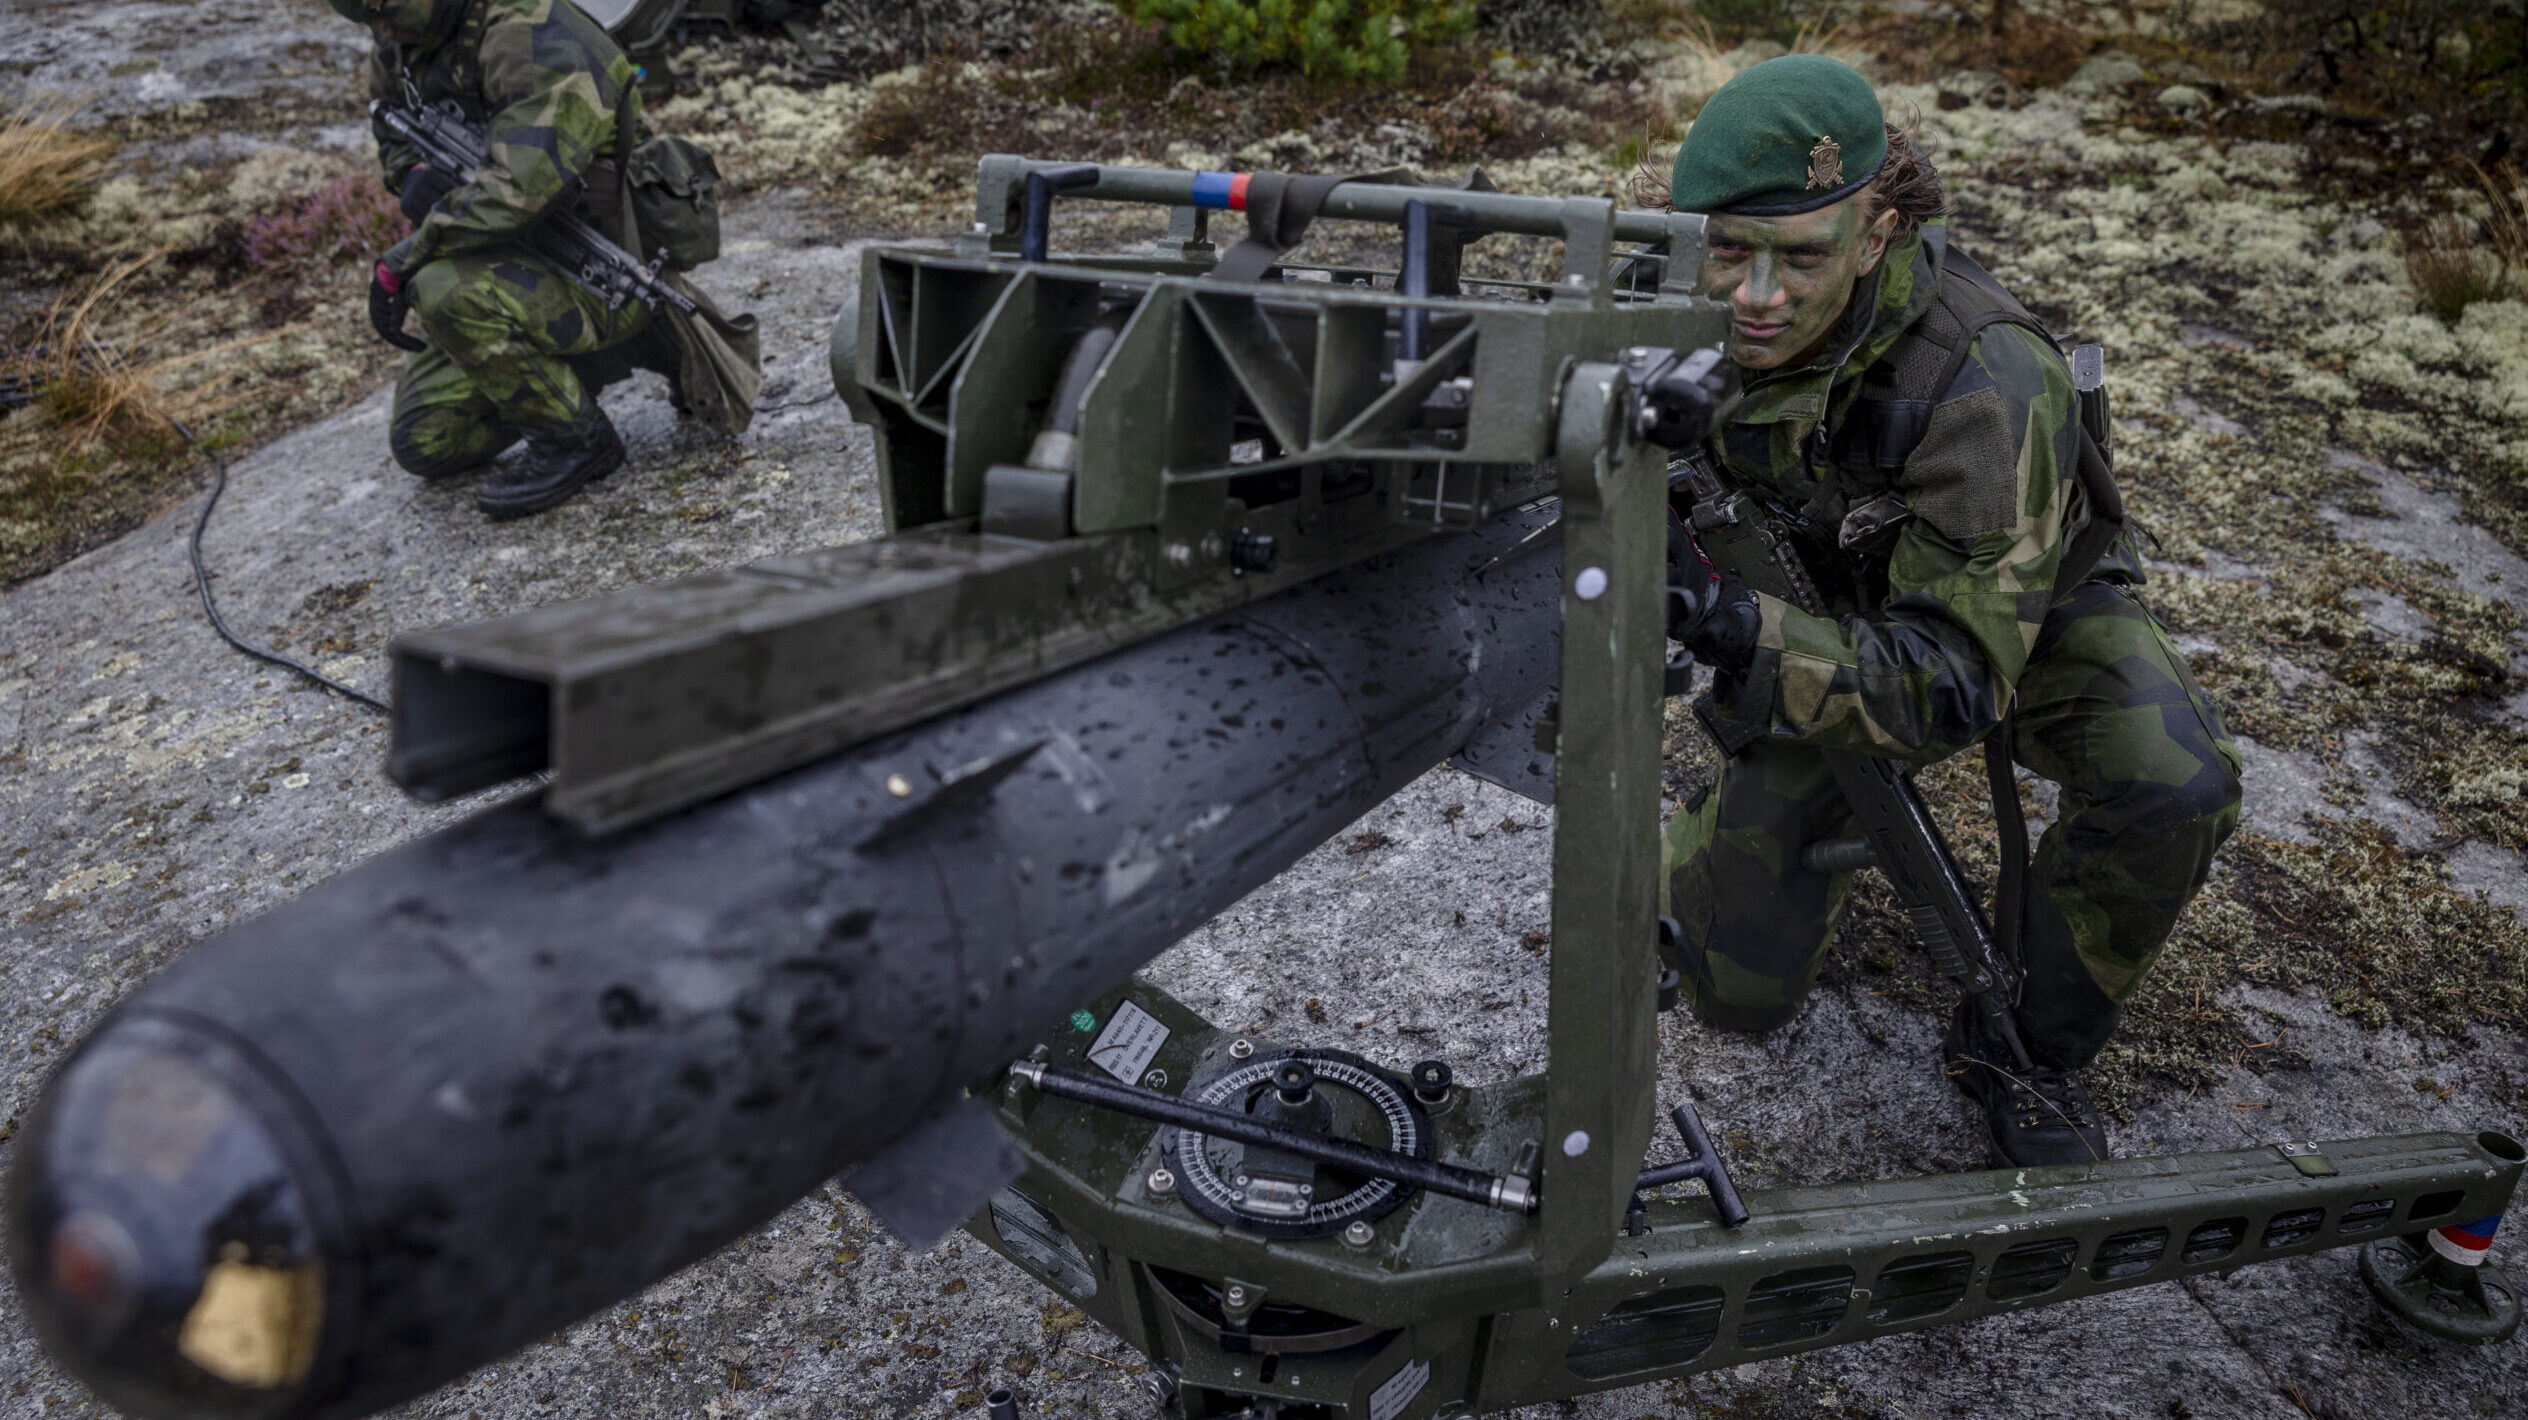 Sweden’s massive opportunity to rethink its role in Nordic defense